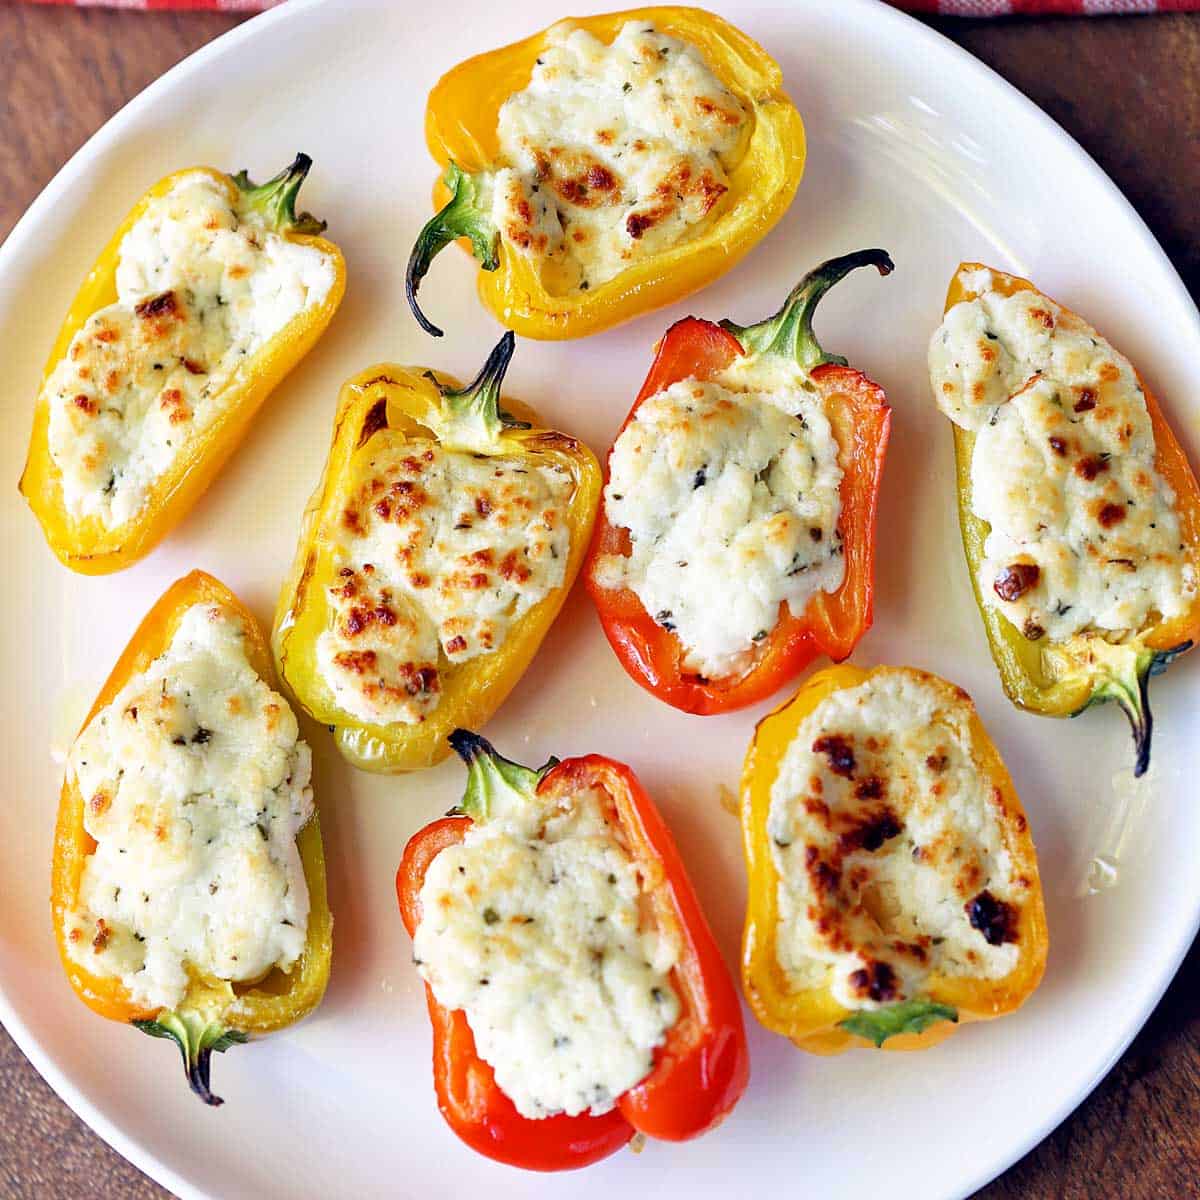 Stuffed mini peppers served on a white plate.